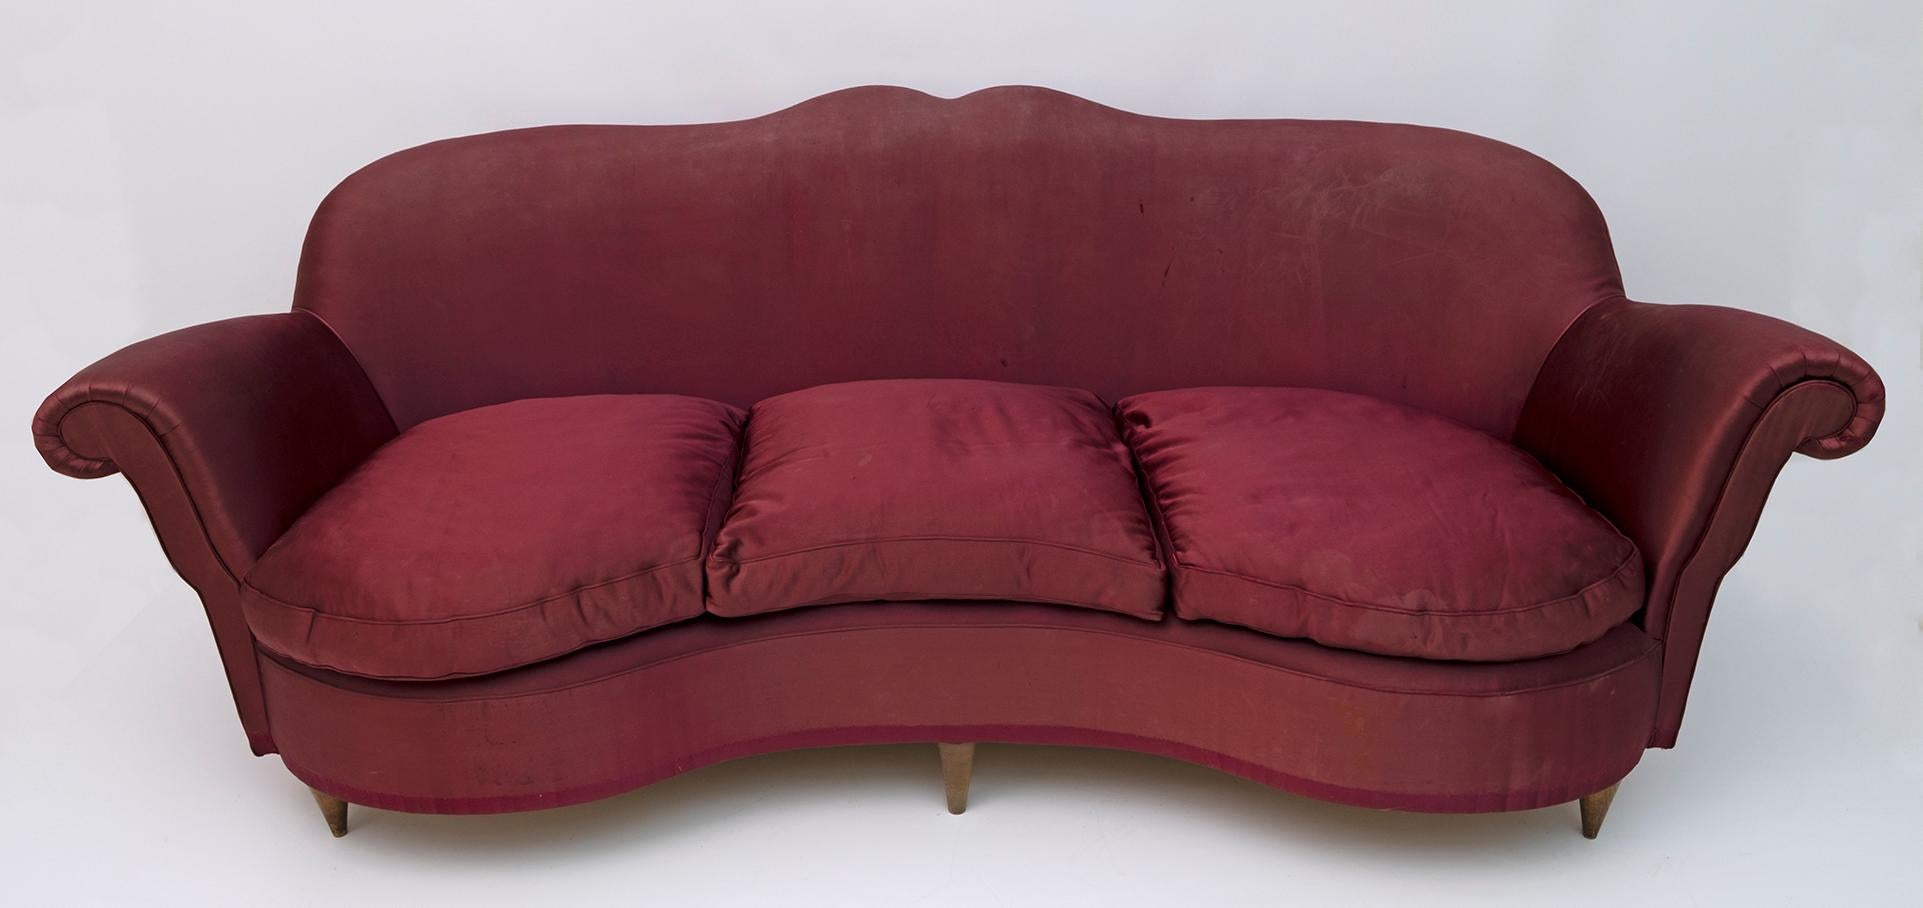 Beautiful curved sofa designed by Federico Munari in the early 1950s, this model is very rare and is one of the first models designed by Munari. The satin covering is original from the time but it is recommended to replace it as you can see from the